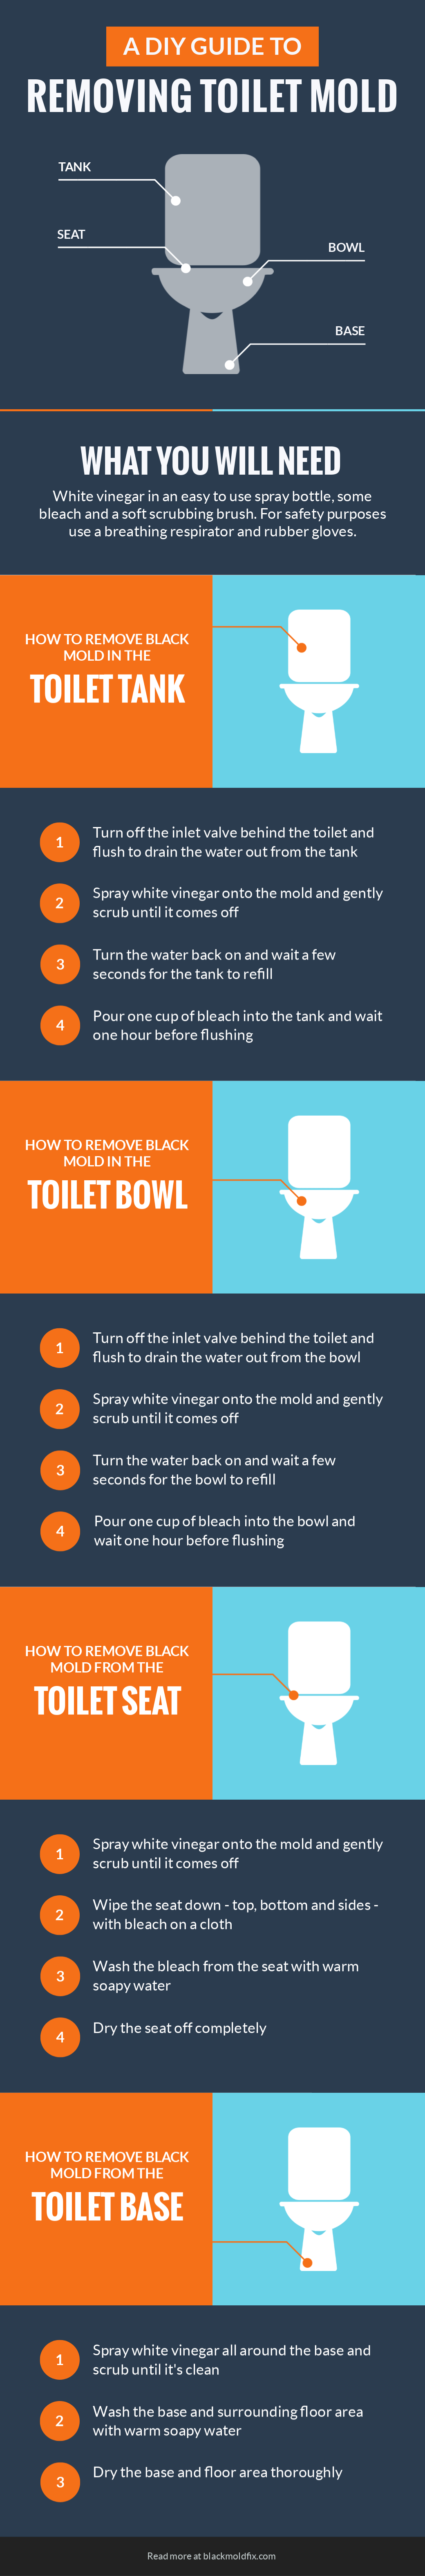 toilet-mold-removal-guide